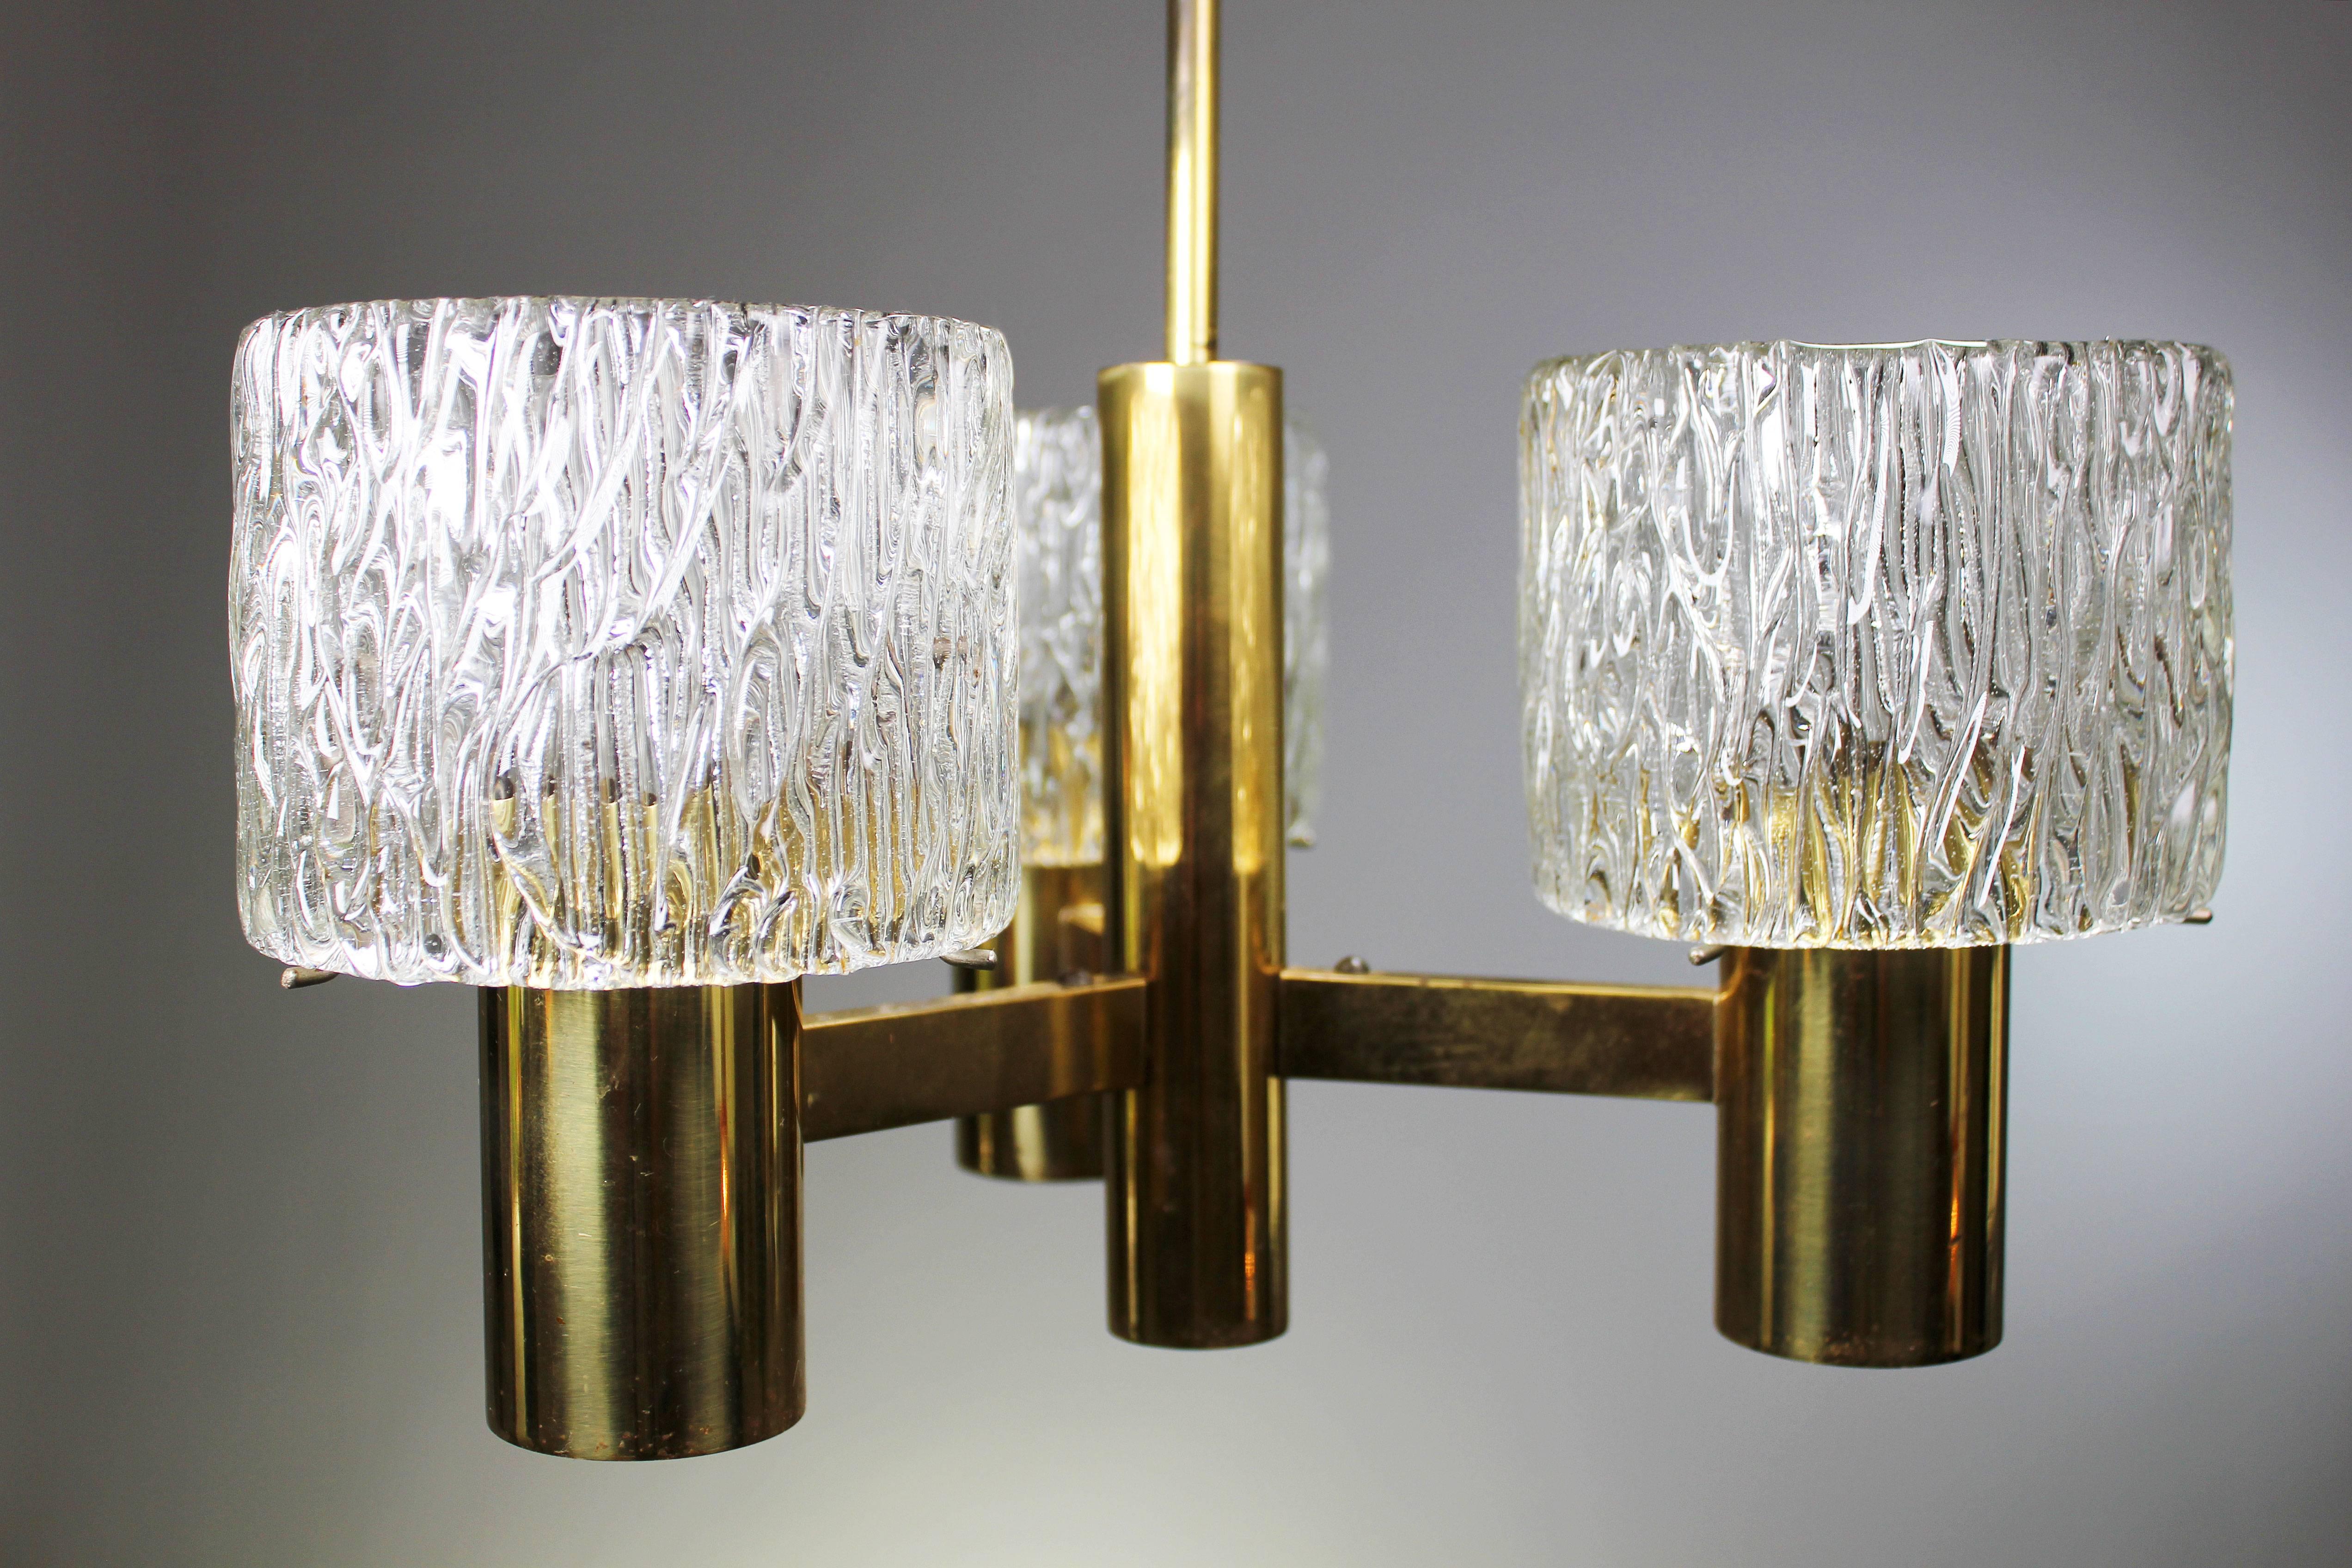 Classic Swedish Mid Century Modern chandelier with three tubular textured glass on brass mount. By acclaimed art glass designer Carl Fagerlund for Swedish Orrefors in the late 1950s. Original brass stem and canopy. Rewiring upon request - local